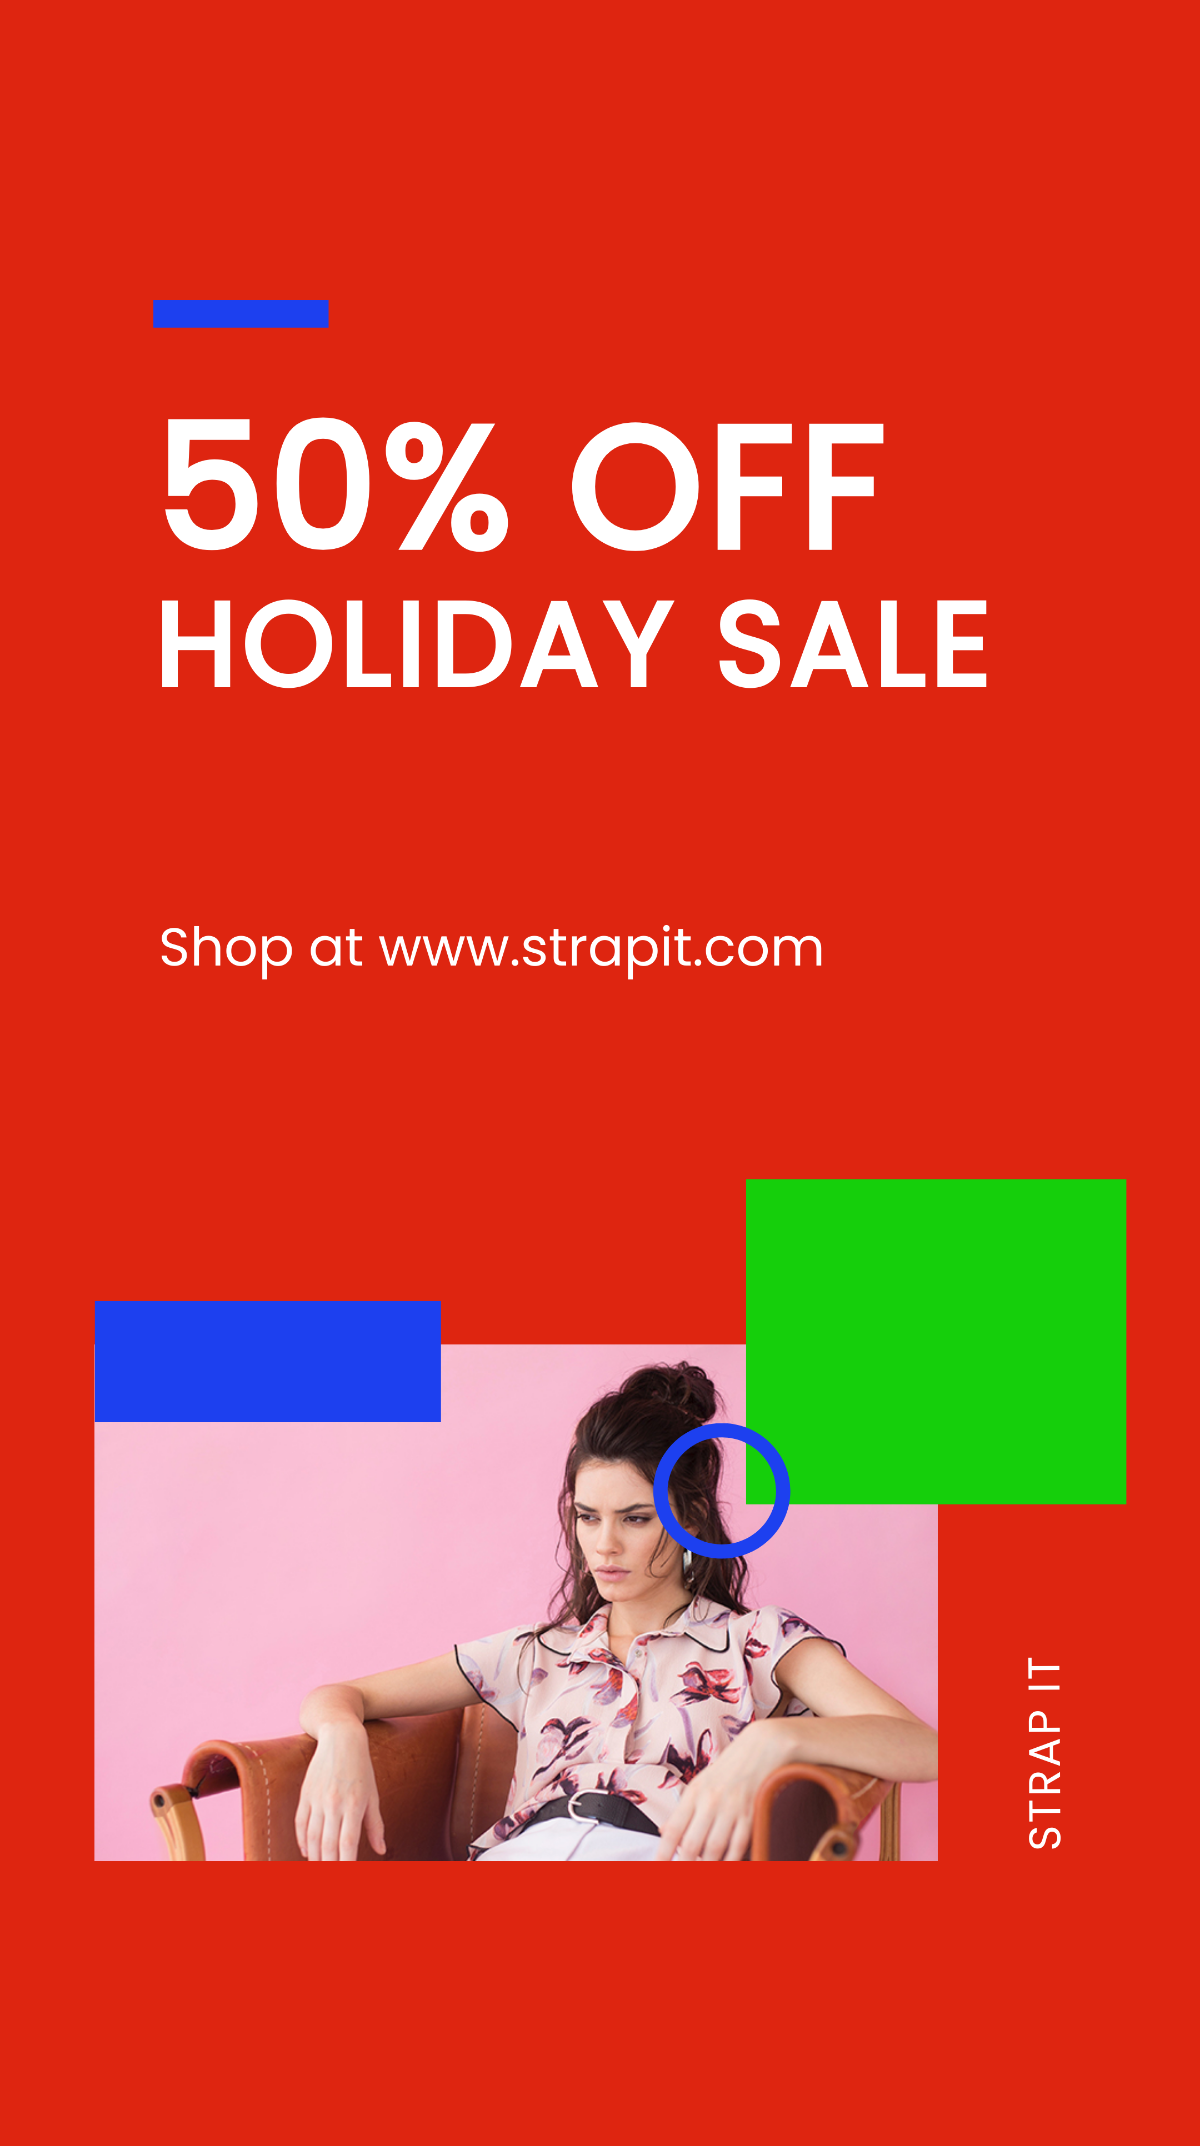 Holiday Offer Sale Whatsapp Image Template